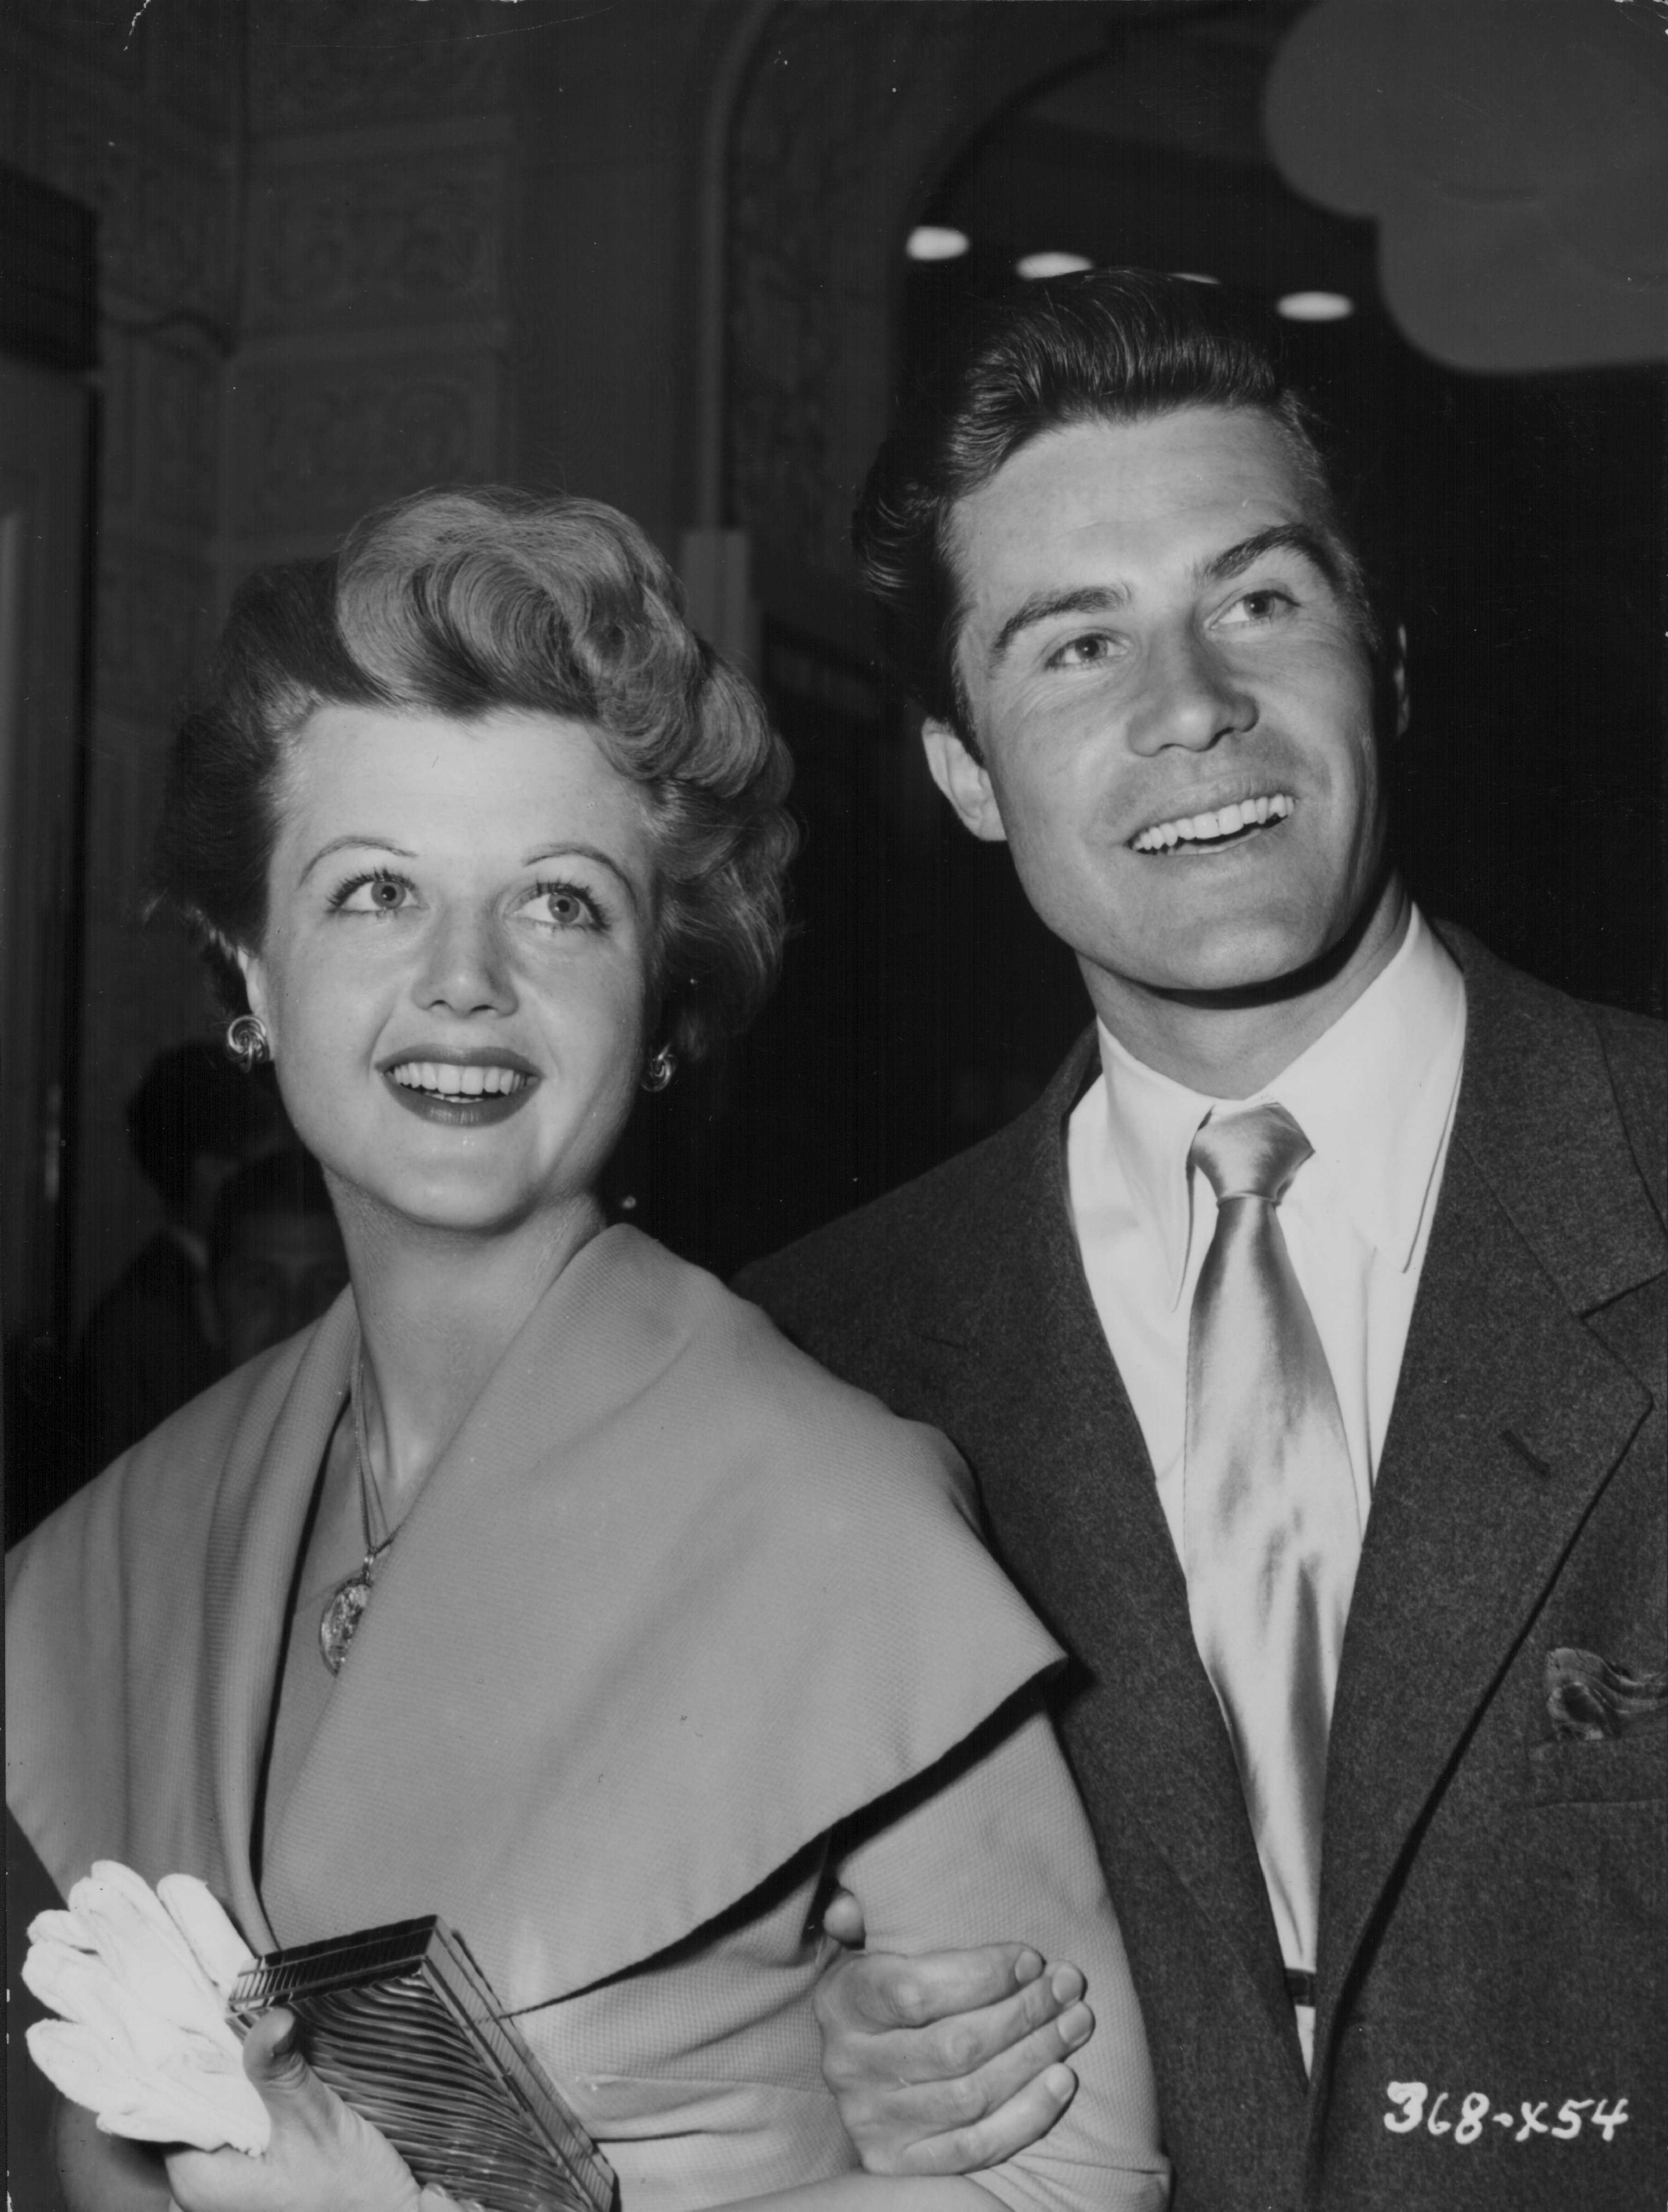 Actress Angela Lansbury and her husband Peter Shaw attending the premiere of the movie 'The Glass Menagerie', 1950. | Source: Getty Images